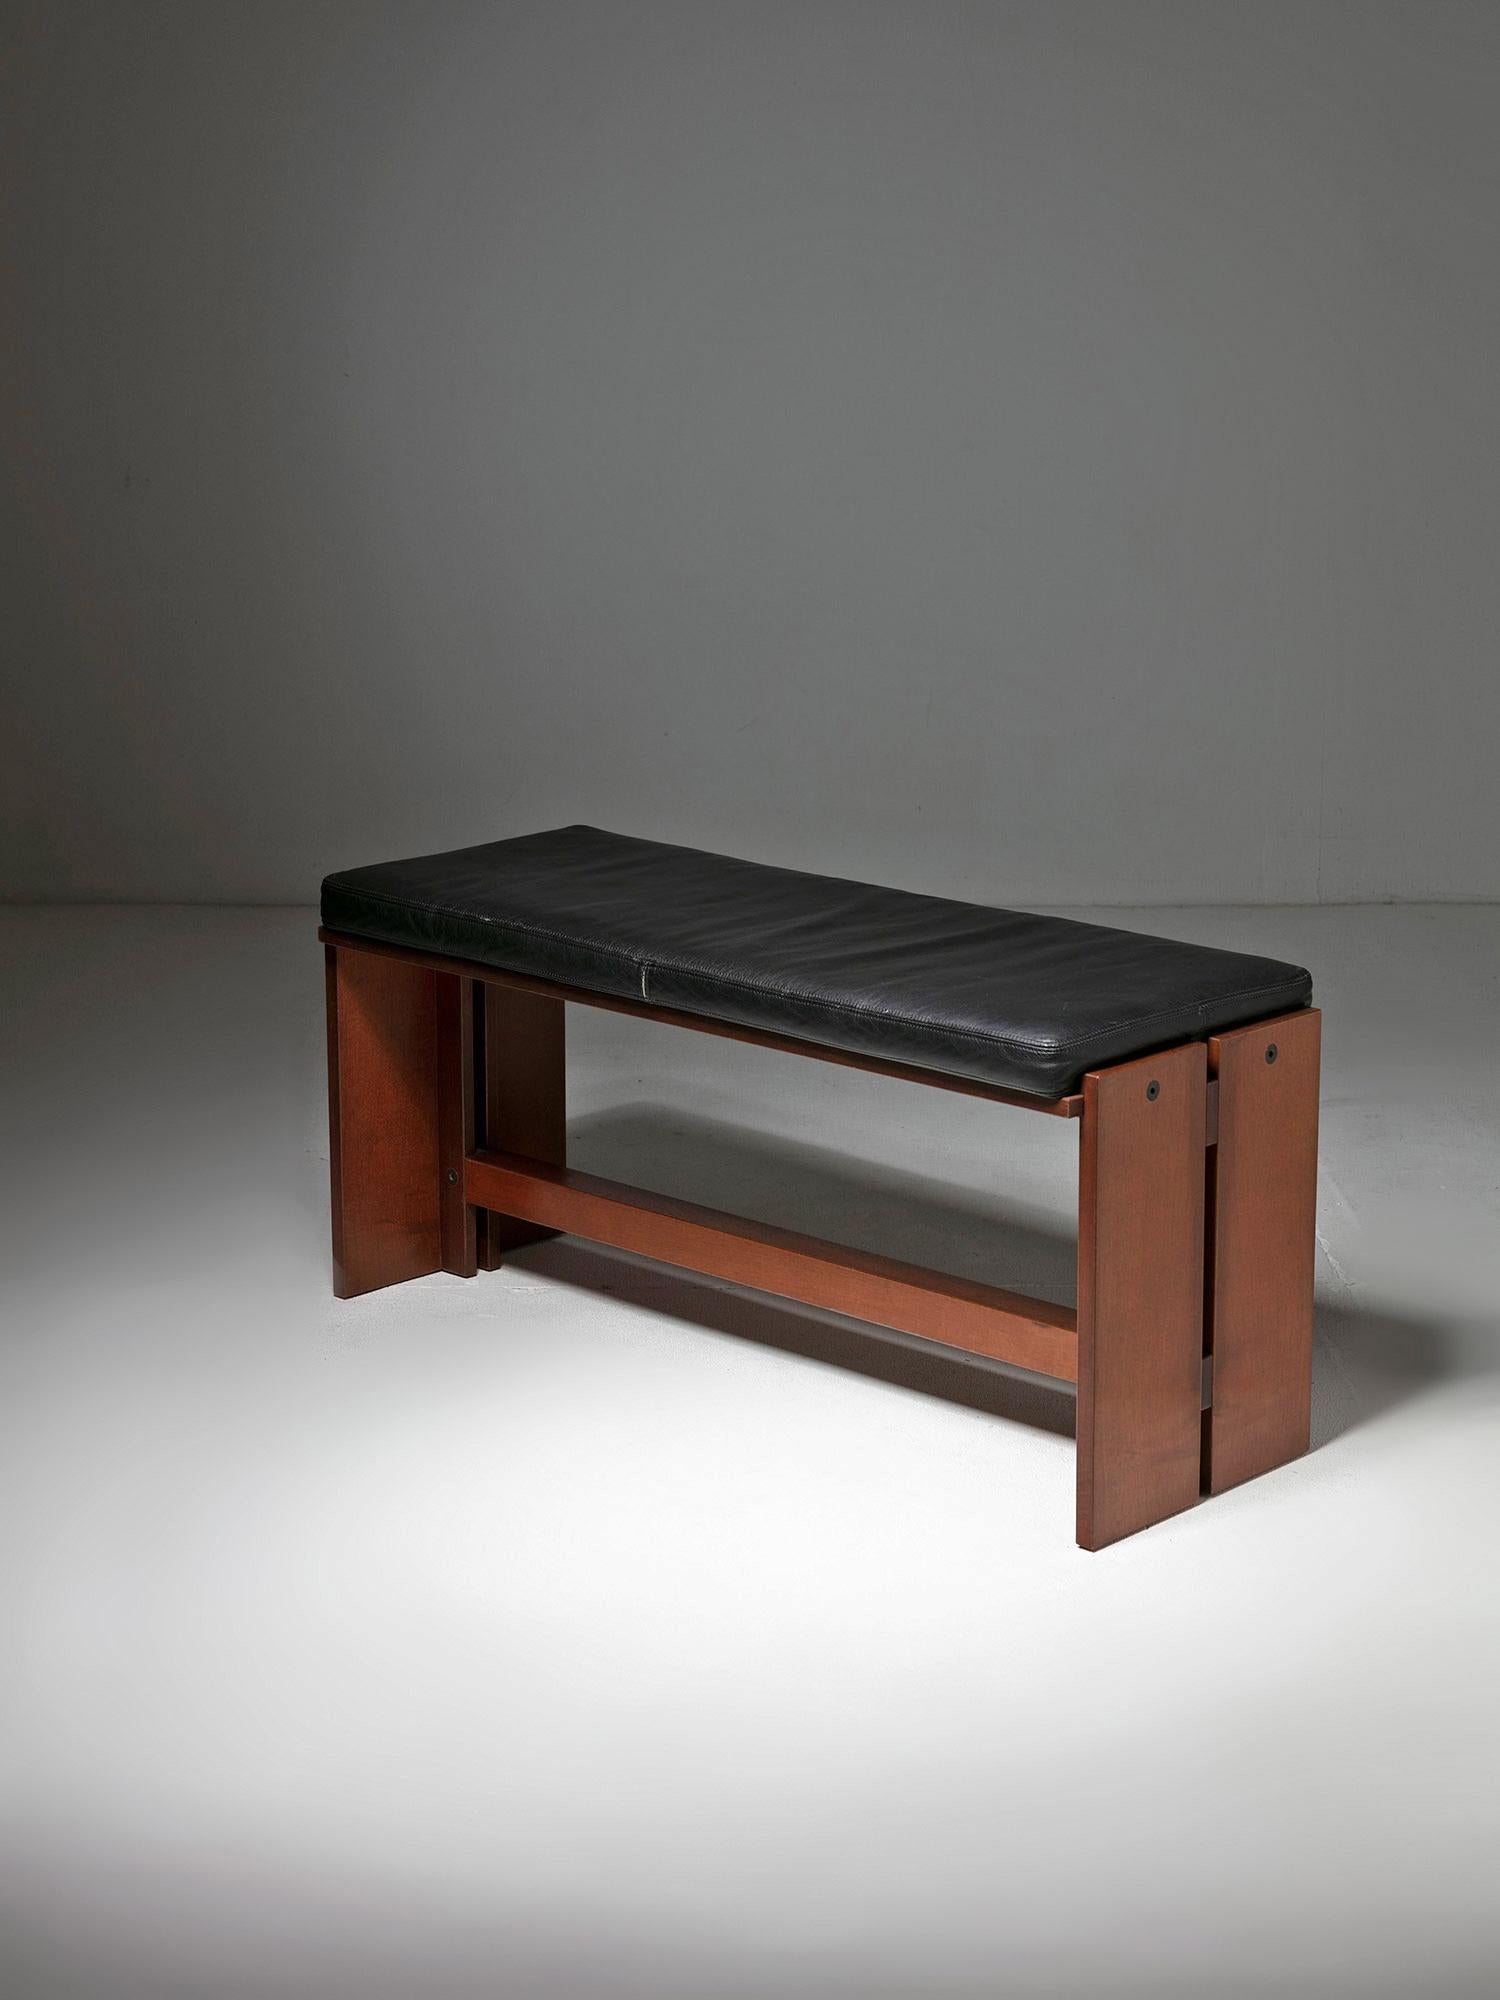 Solid walnut bench model 662 by A. Vigilio for Bernini.
Sturdy frame and movable leather pillow.